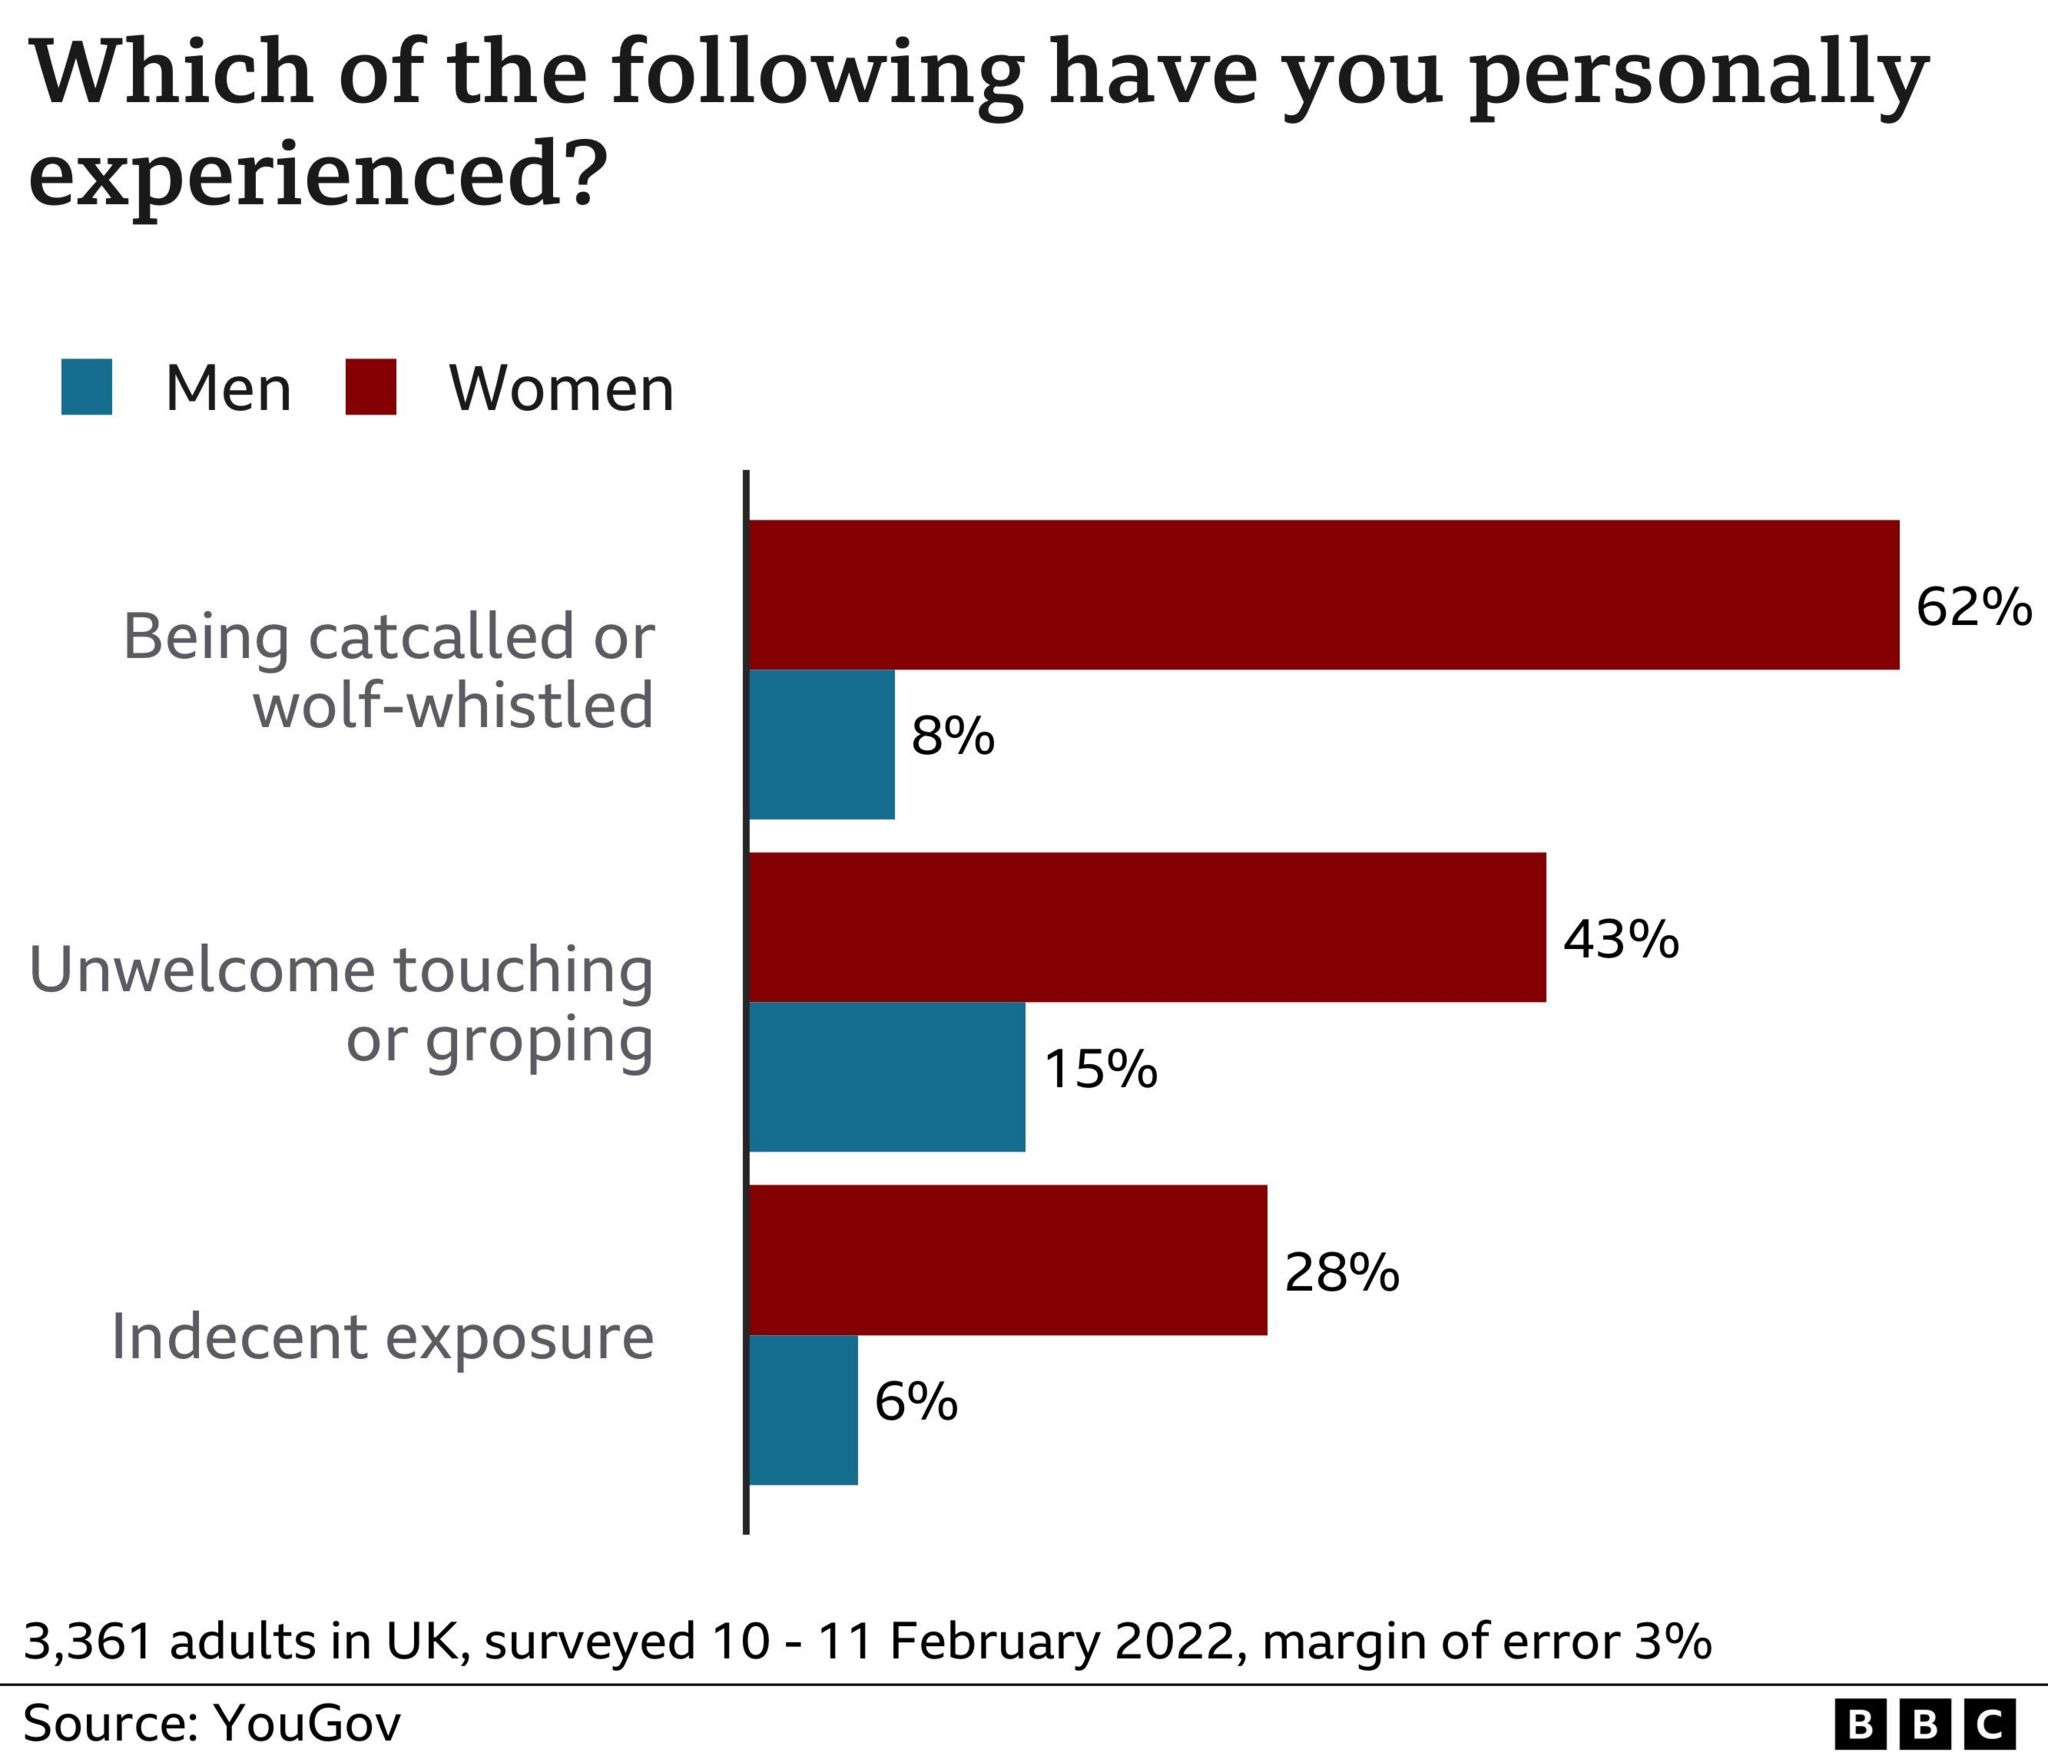 Graphic showing reporting differences between women and men. 62% v 8% with catcalling, 43% v 15% unwanted touching, 28% v 6% indecent exposure